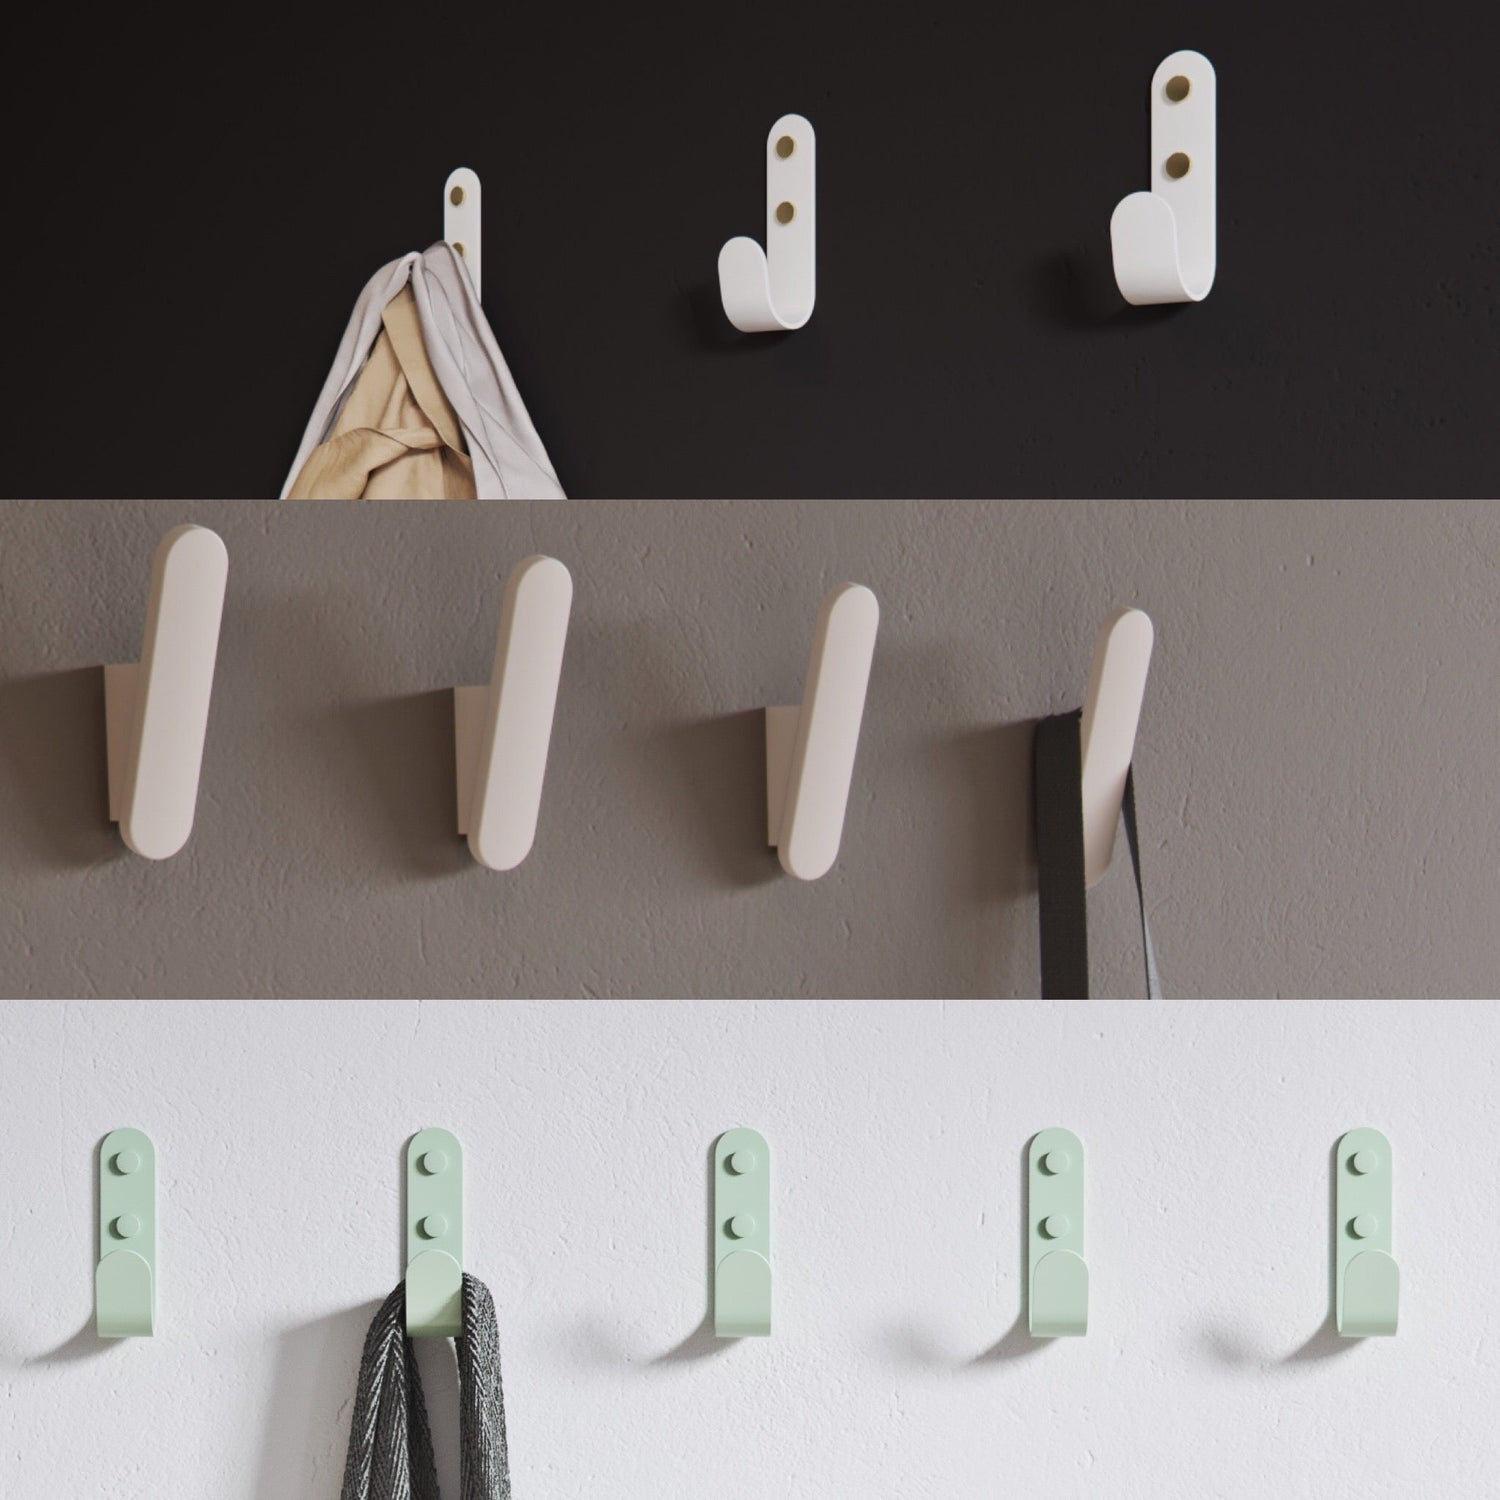 NEW RELEASE: Tallo steel and wood wall hooks - The Hairpin Leg Co.